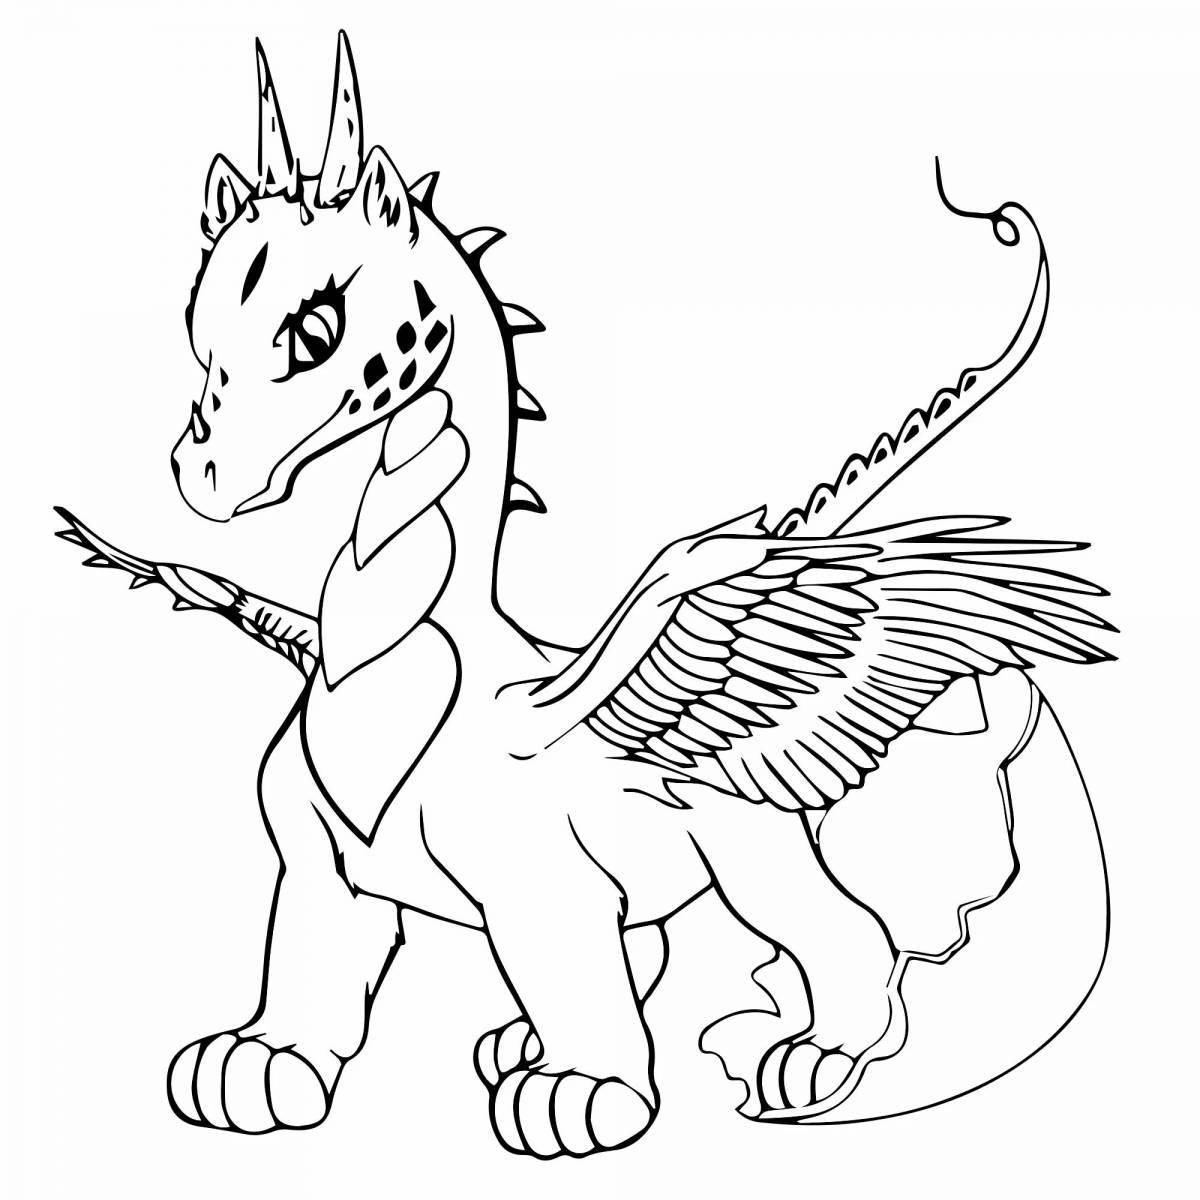 Glorious dragon coloring book for kids